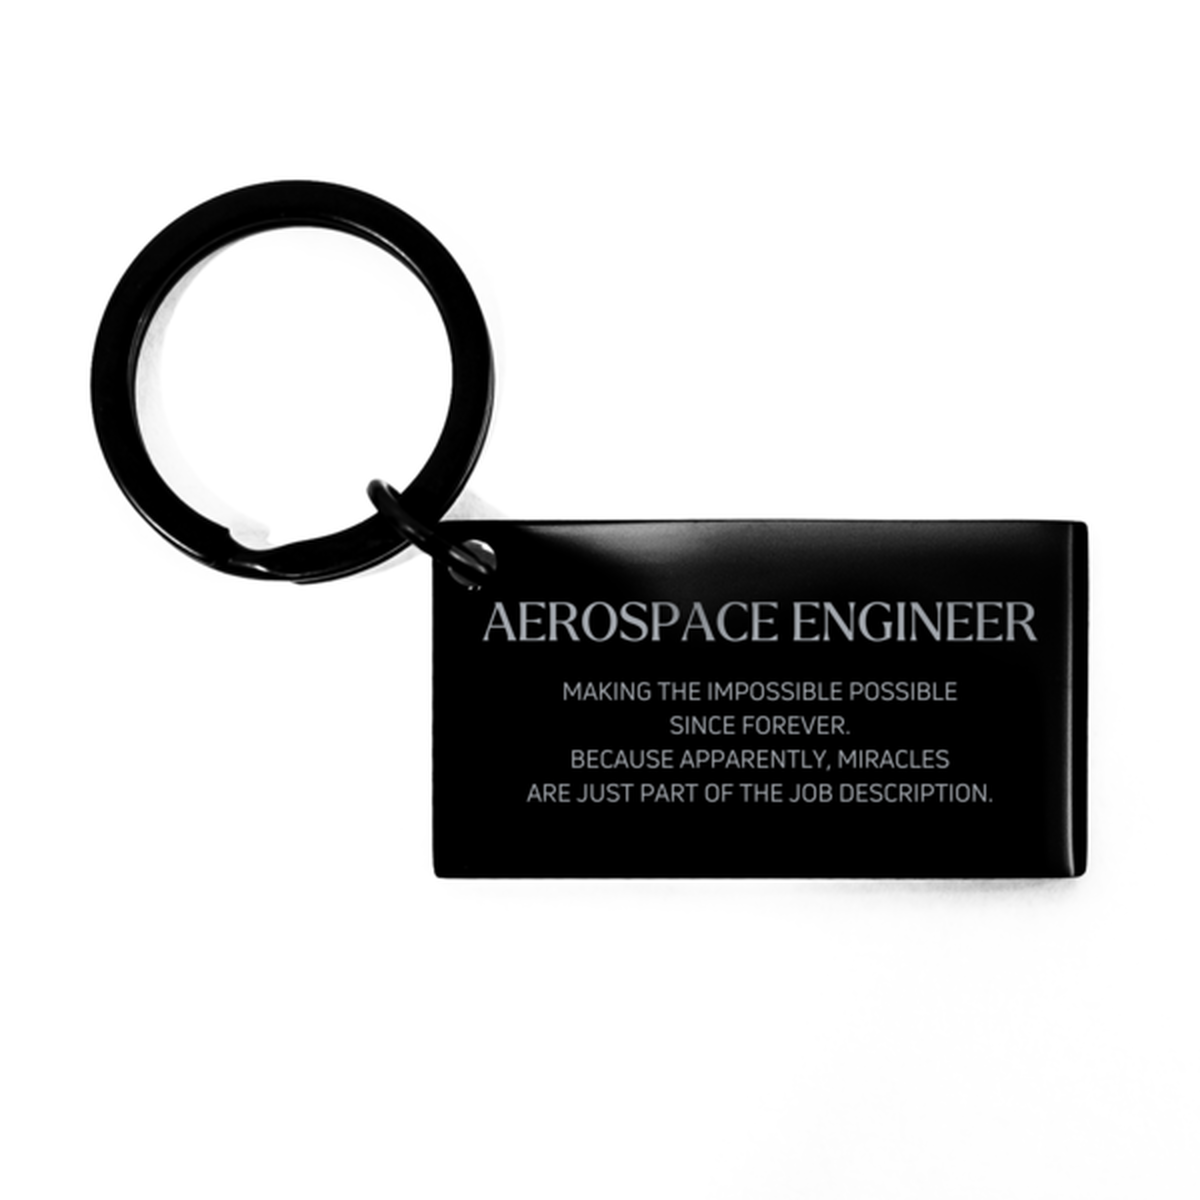 Funny Aerospace Engineer Gifts, Miracles are just part of the job description, Inspirational Birthday Keychain For Aerospace Engineer, Men, Women, Coworkers, Friends, Boss